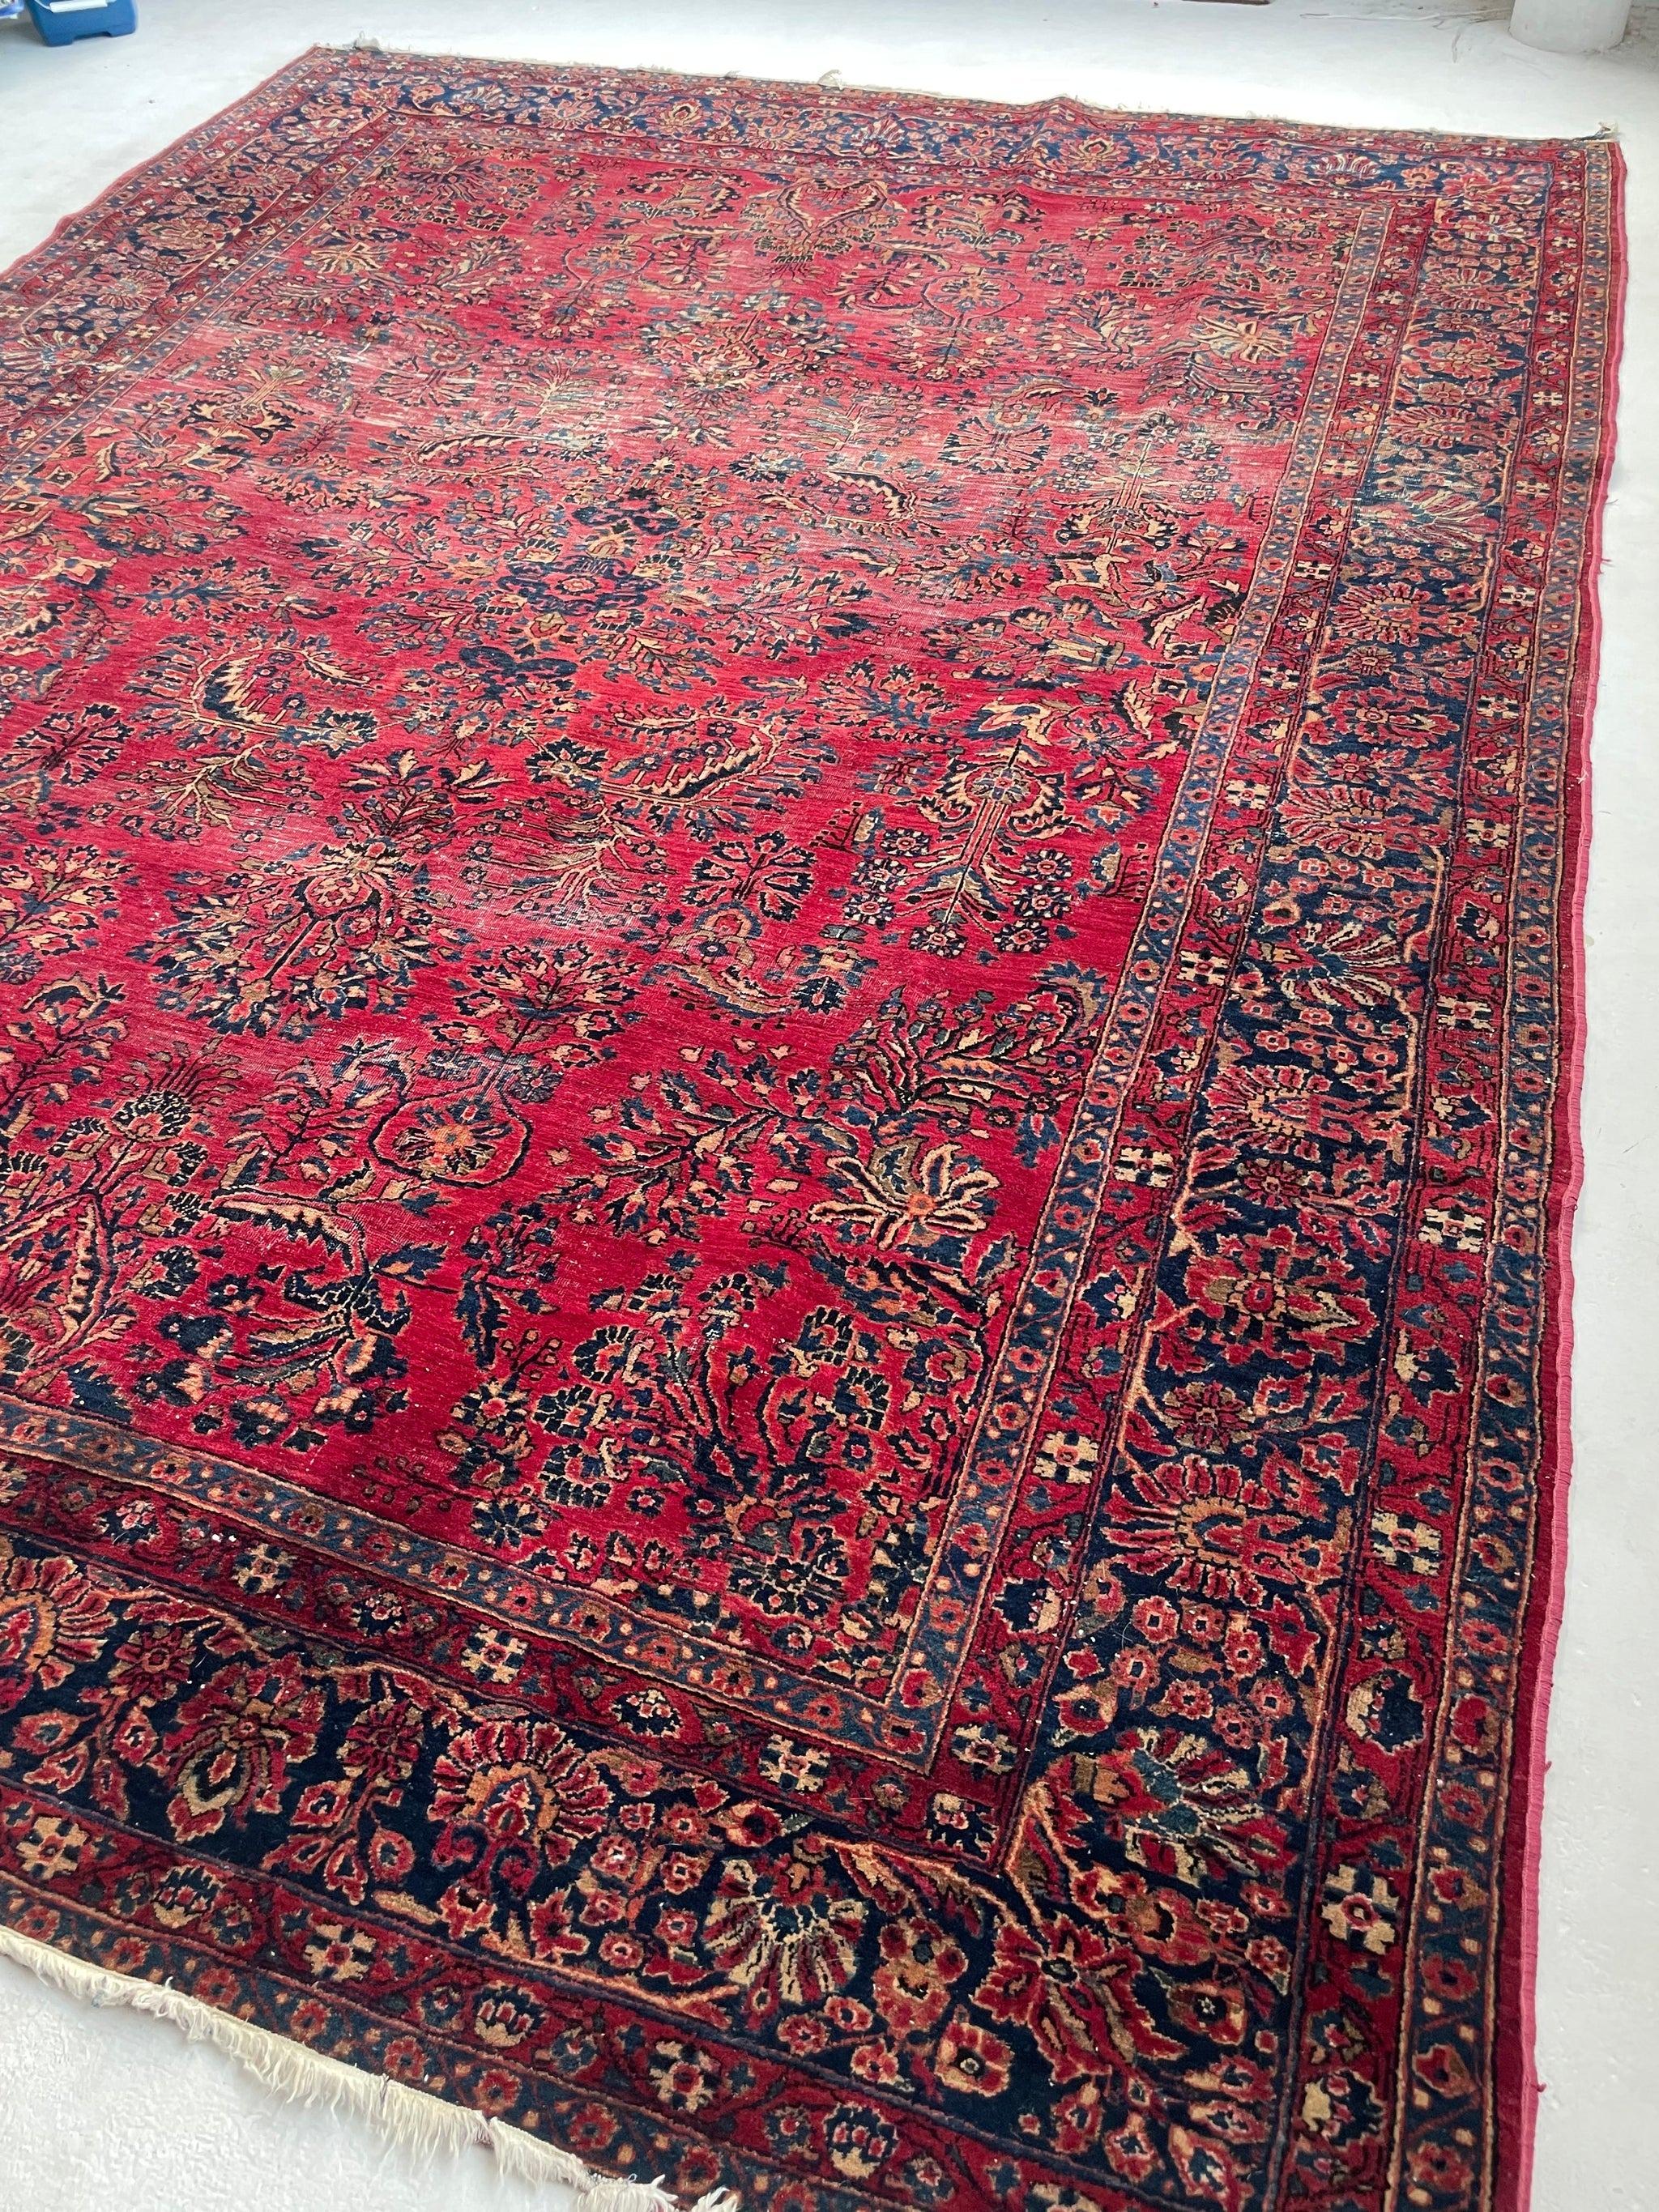 Lovely Botanical Distressed Antique Persian Sarouk  Berry, Pomegranate, Sangria & more

Size: 9 x 11.7
Age: Antique, C. 1920-30's
Pile: Low pile with incredible age-related patina, some worn spots but nothing too crazy

This rug is one-of-a-kind,